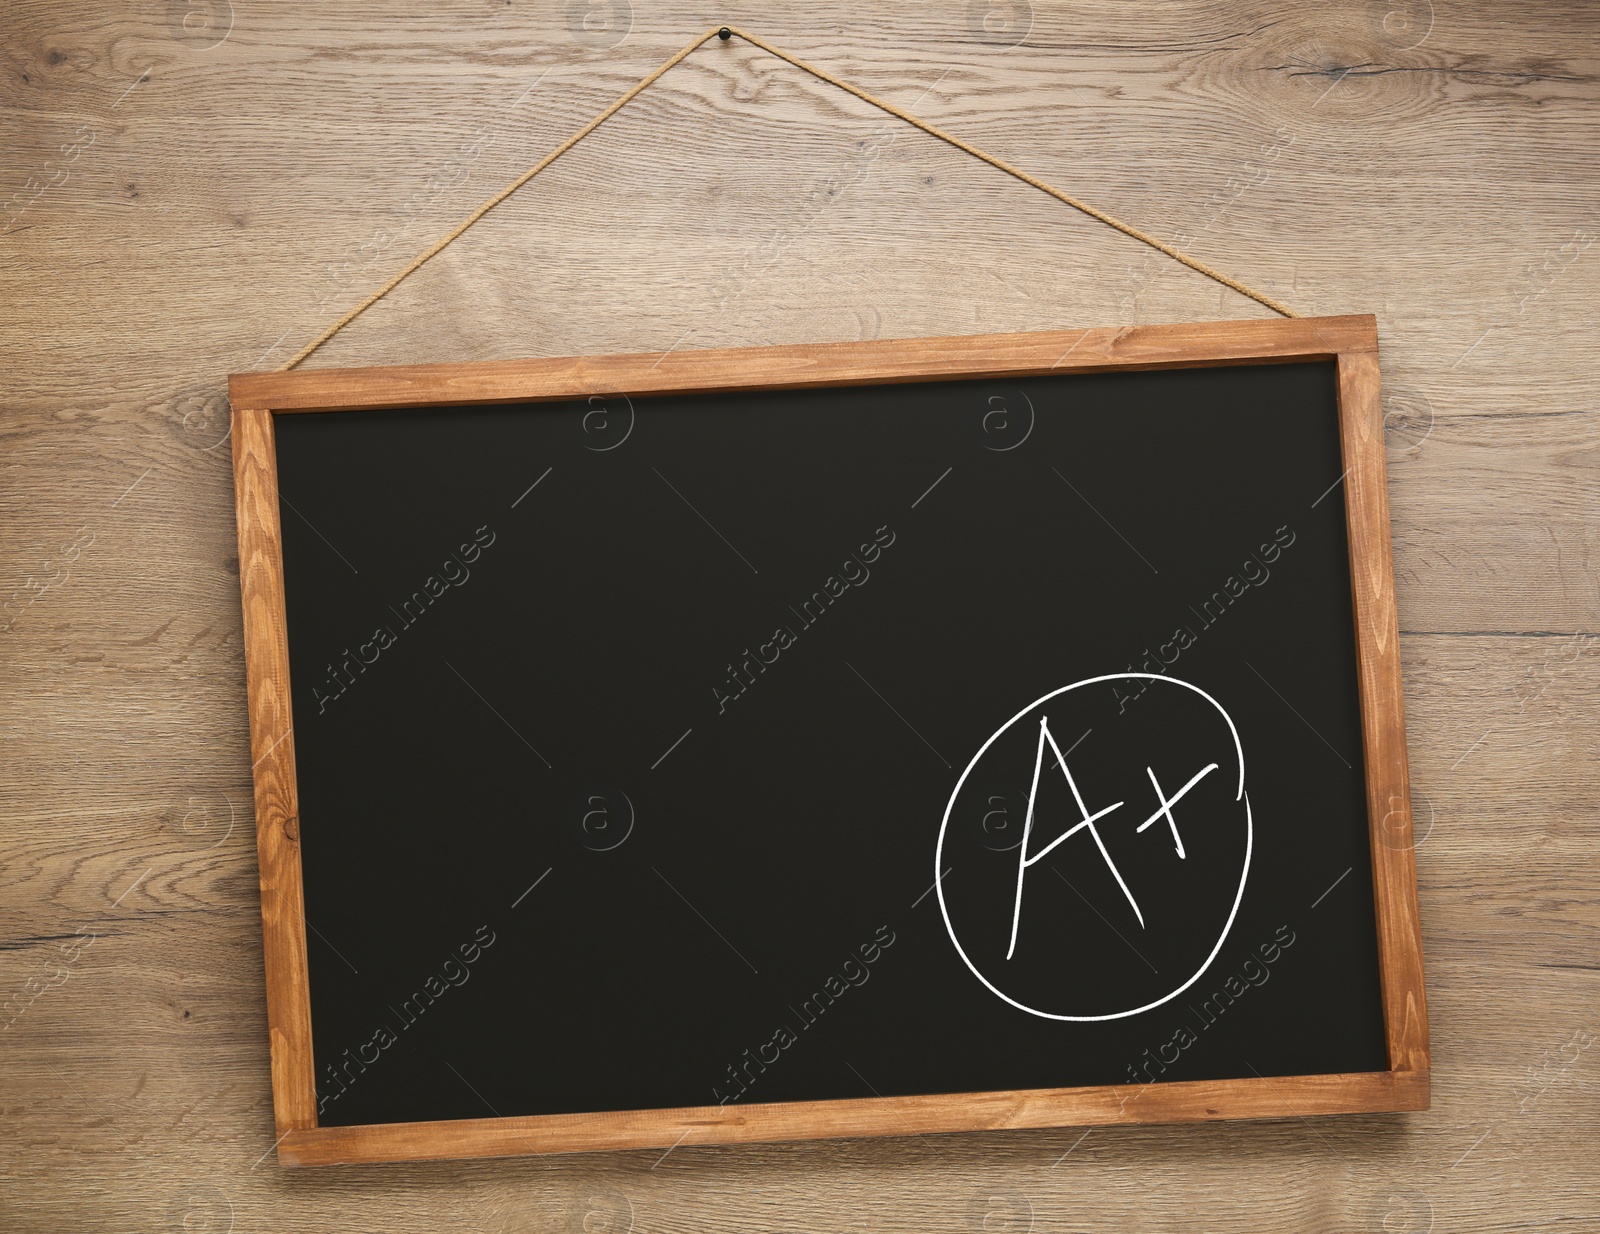 Image of School grade. Small blackboard with chalked letter A and plus symbol on wooden wall